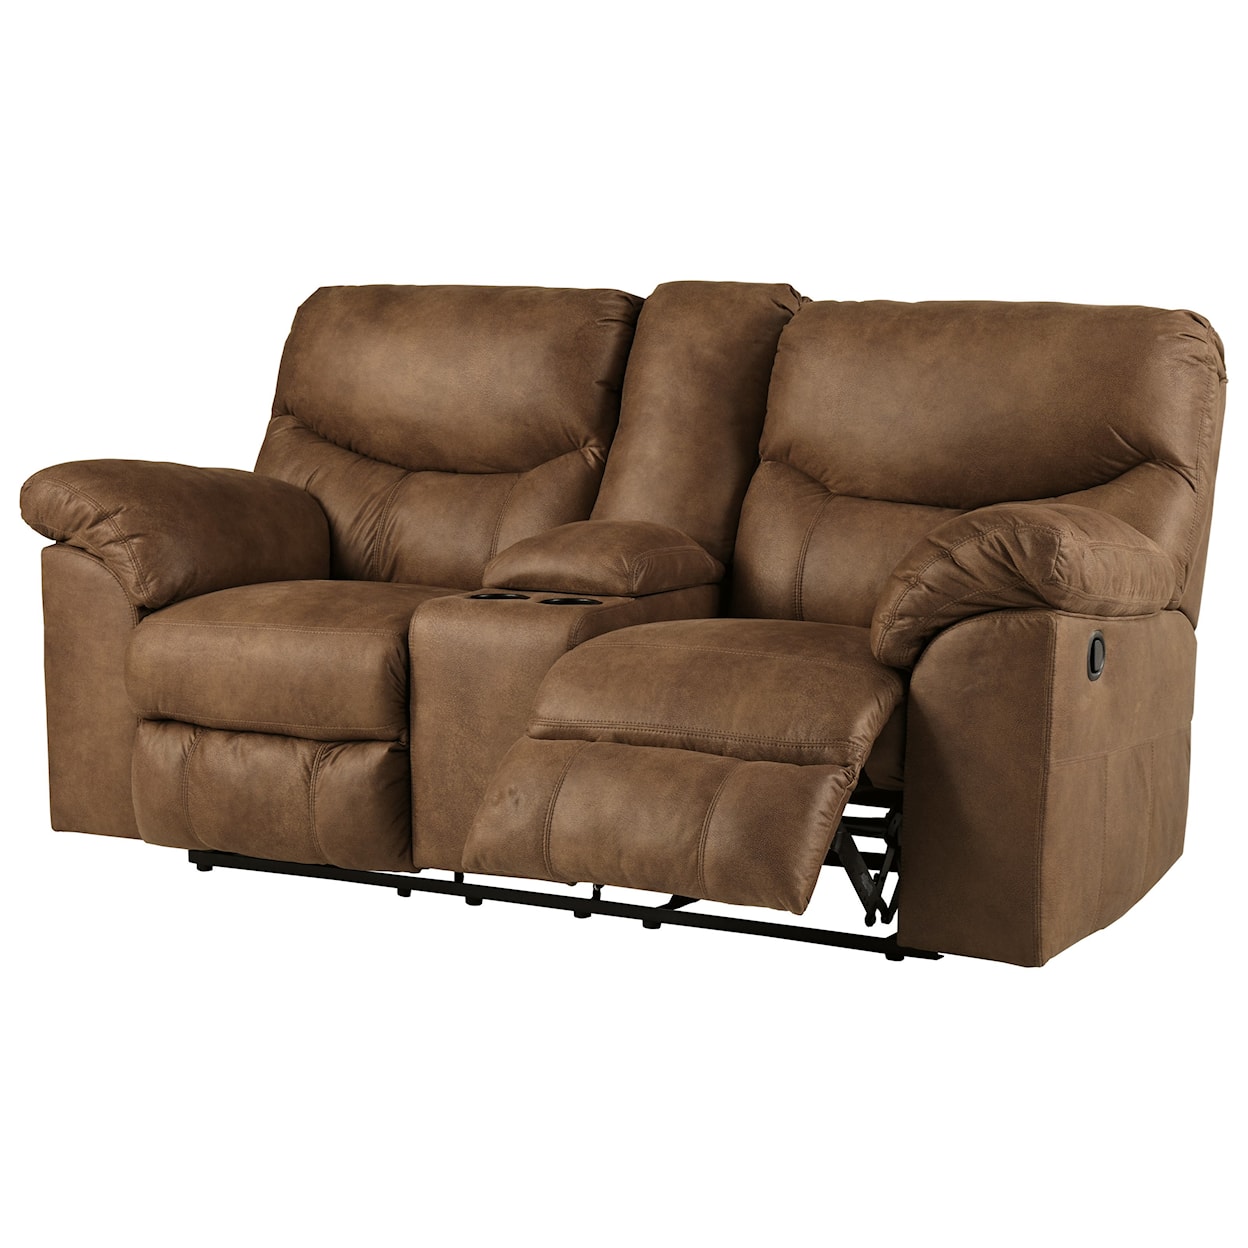 Signature Design by Ashley Boxberg Double Reclining Loveseat with Console